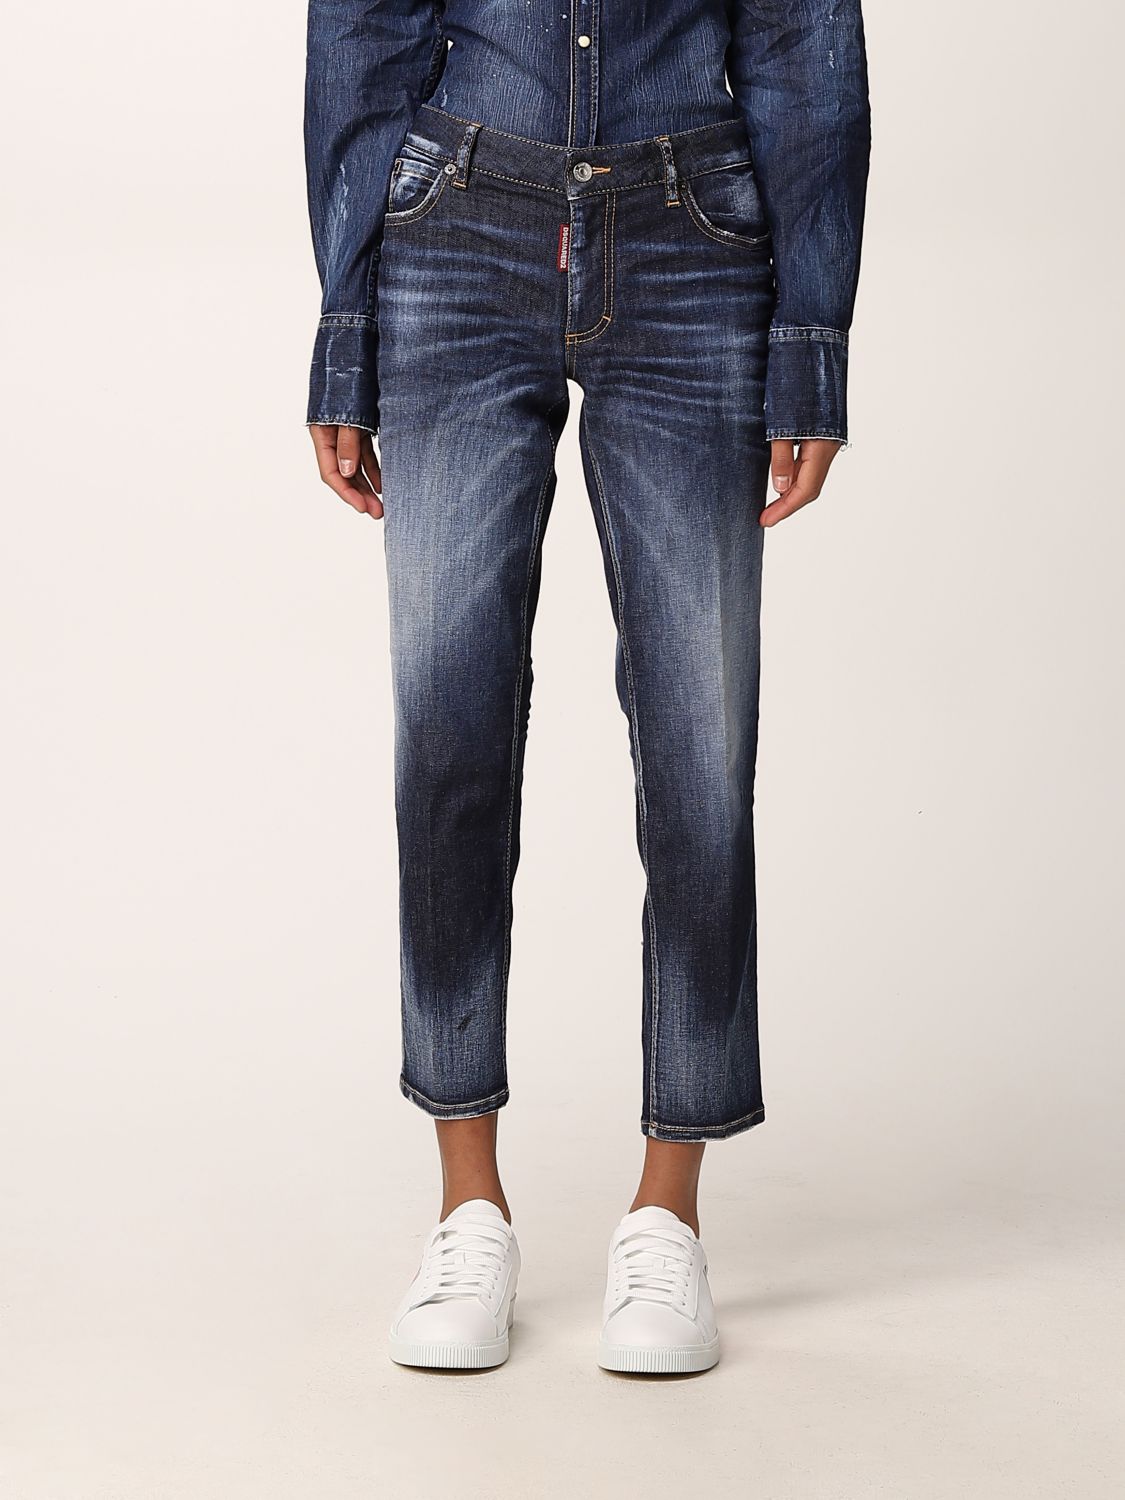 Womens Jeans DSquared² Jeans Save 5% DSquared² 5 Pockets Cropped Denim Jeans in Blue 